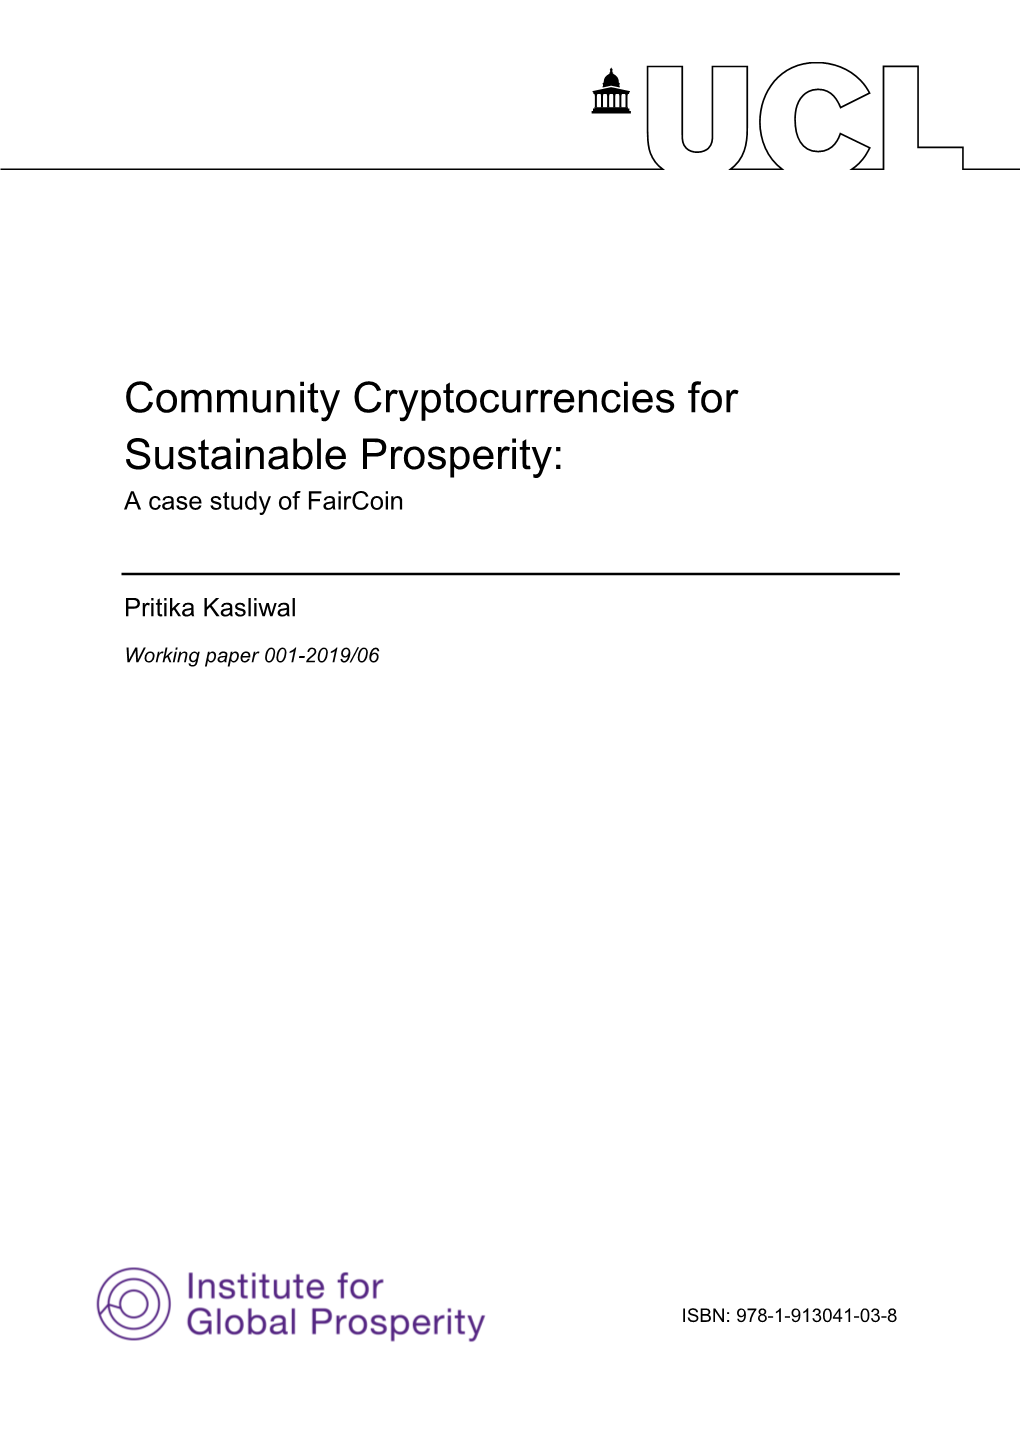 Community Cryptocurrencies for Sustainable Prosperity: a Case Study of Faircoin